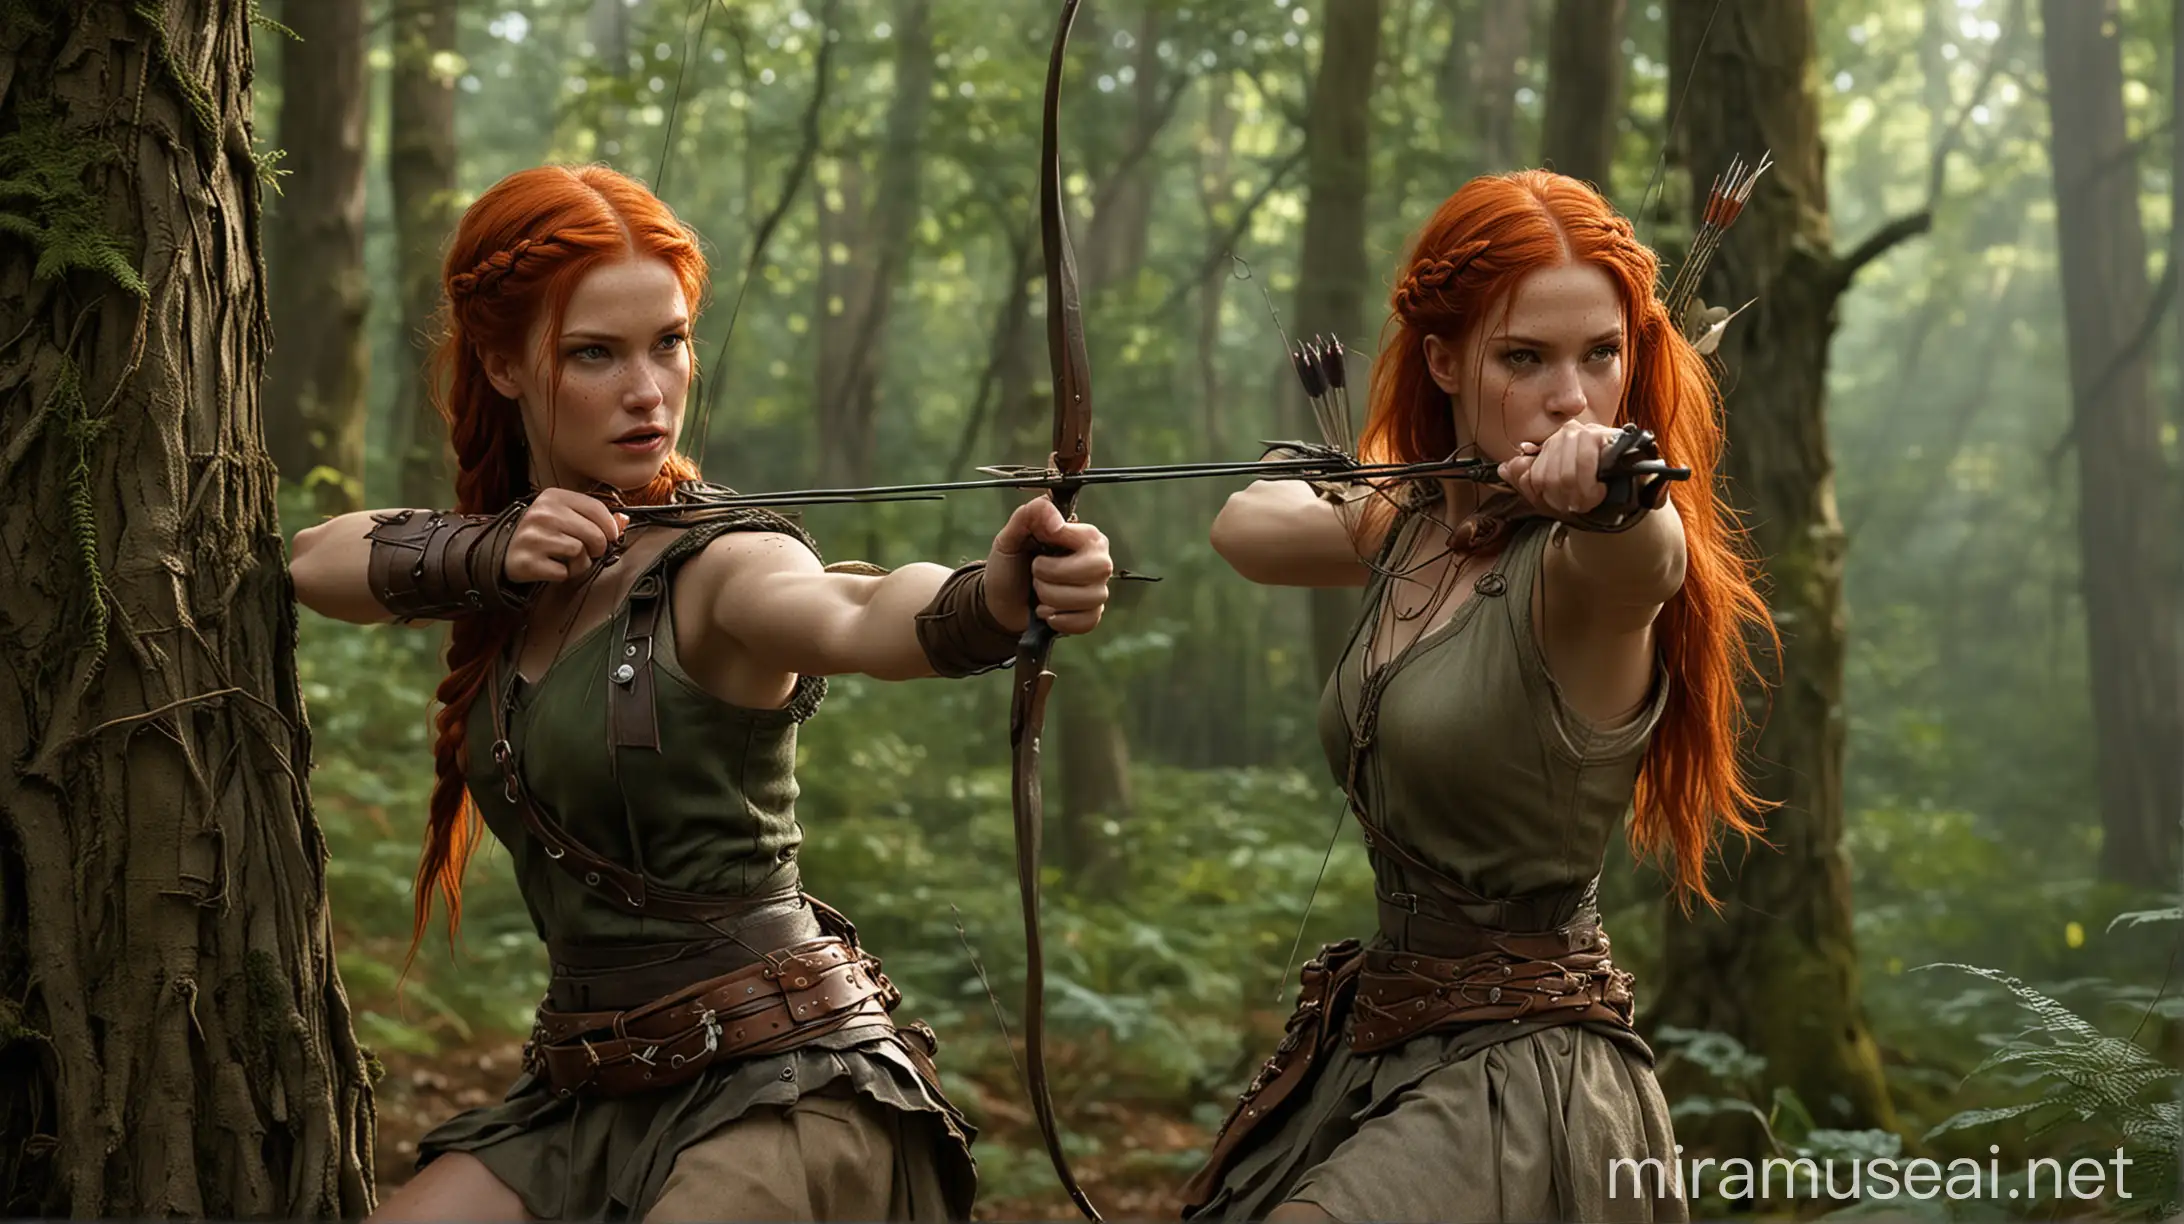 Fiery RedHaired Archer Aiming at Designer Purse in Enchanted Forest